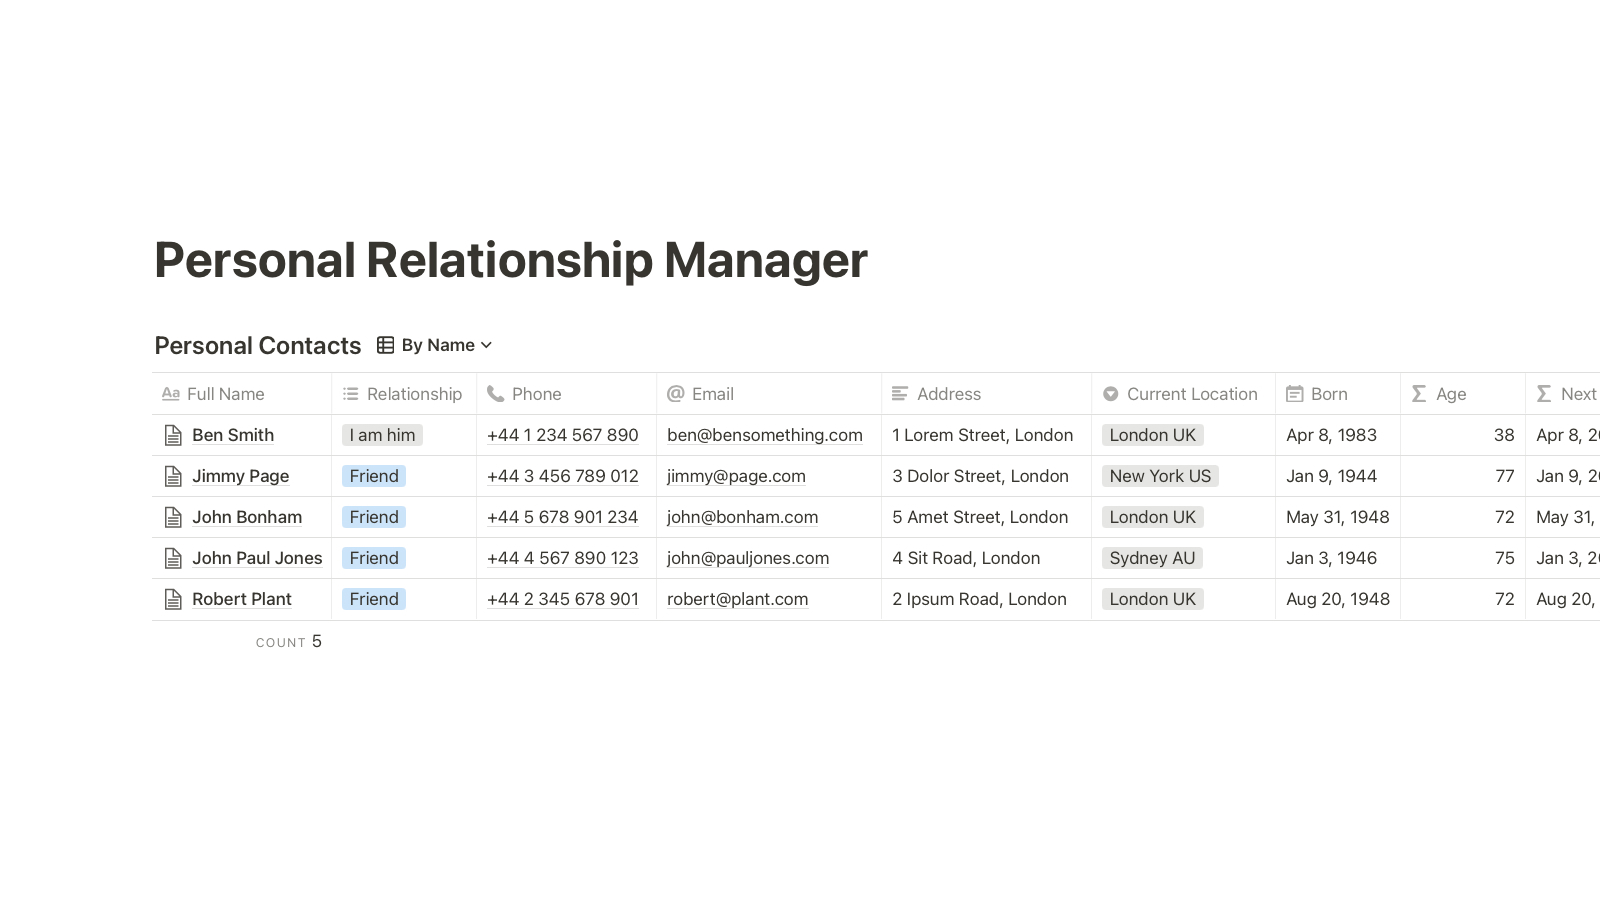 Personal Relationship Manager